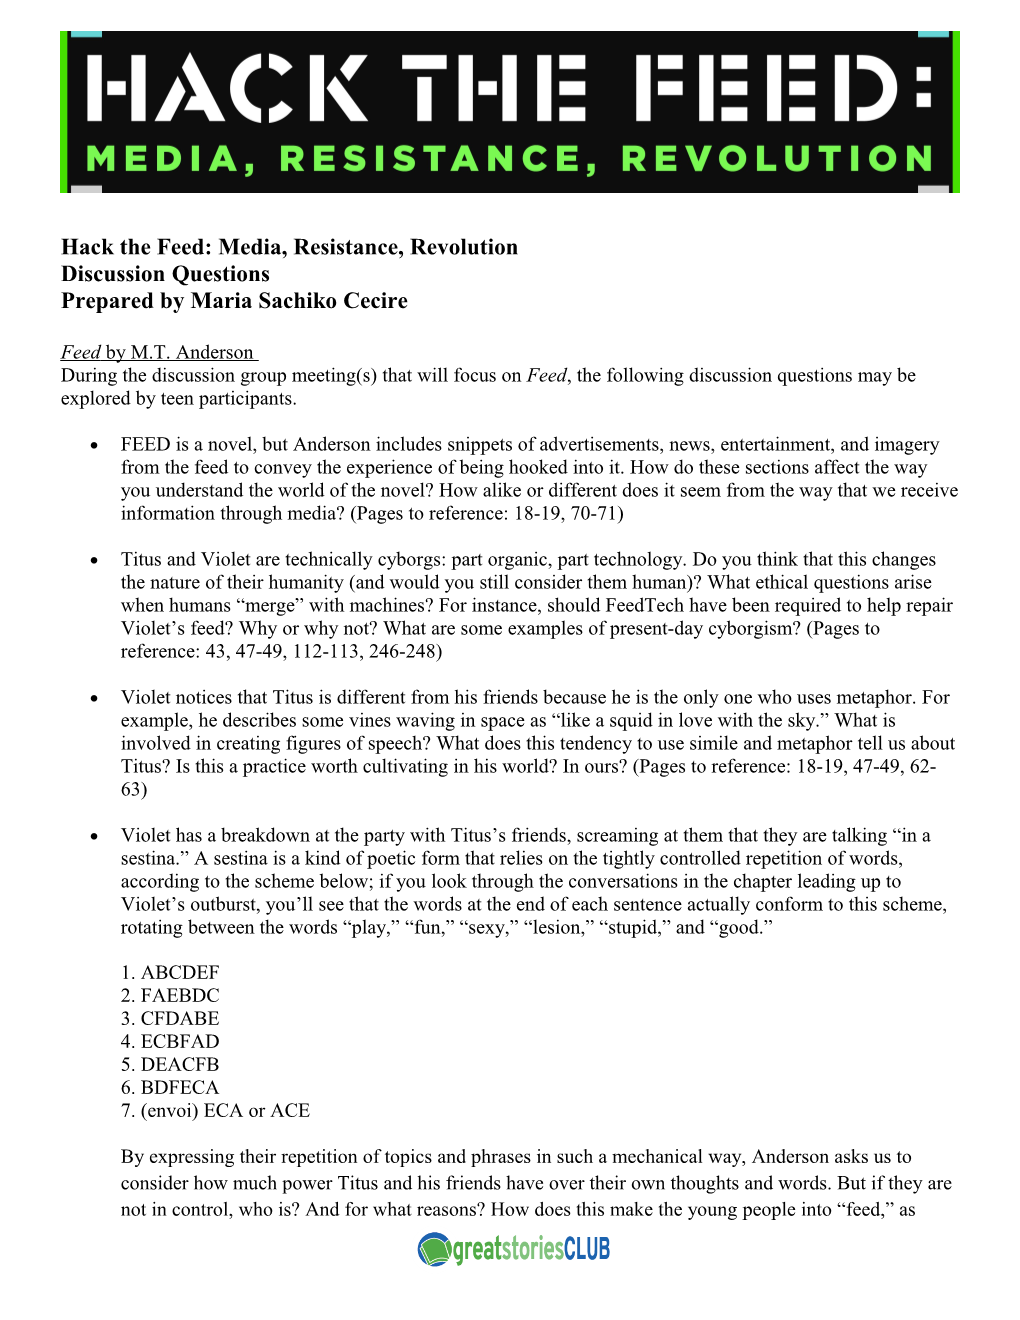 Hack the Feed: Media, Resistance, Revolution Discussion Questions